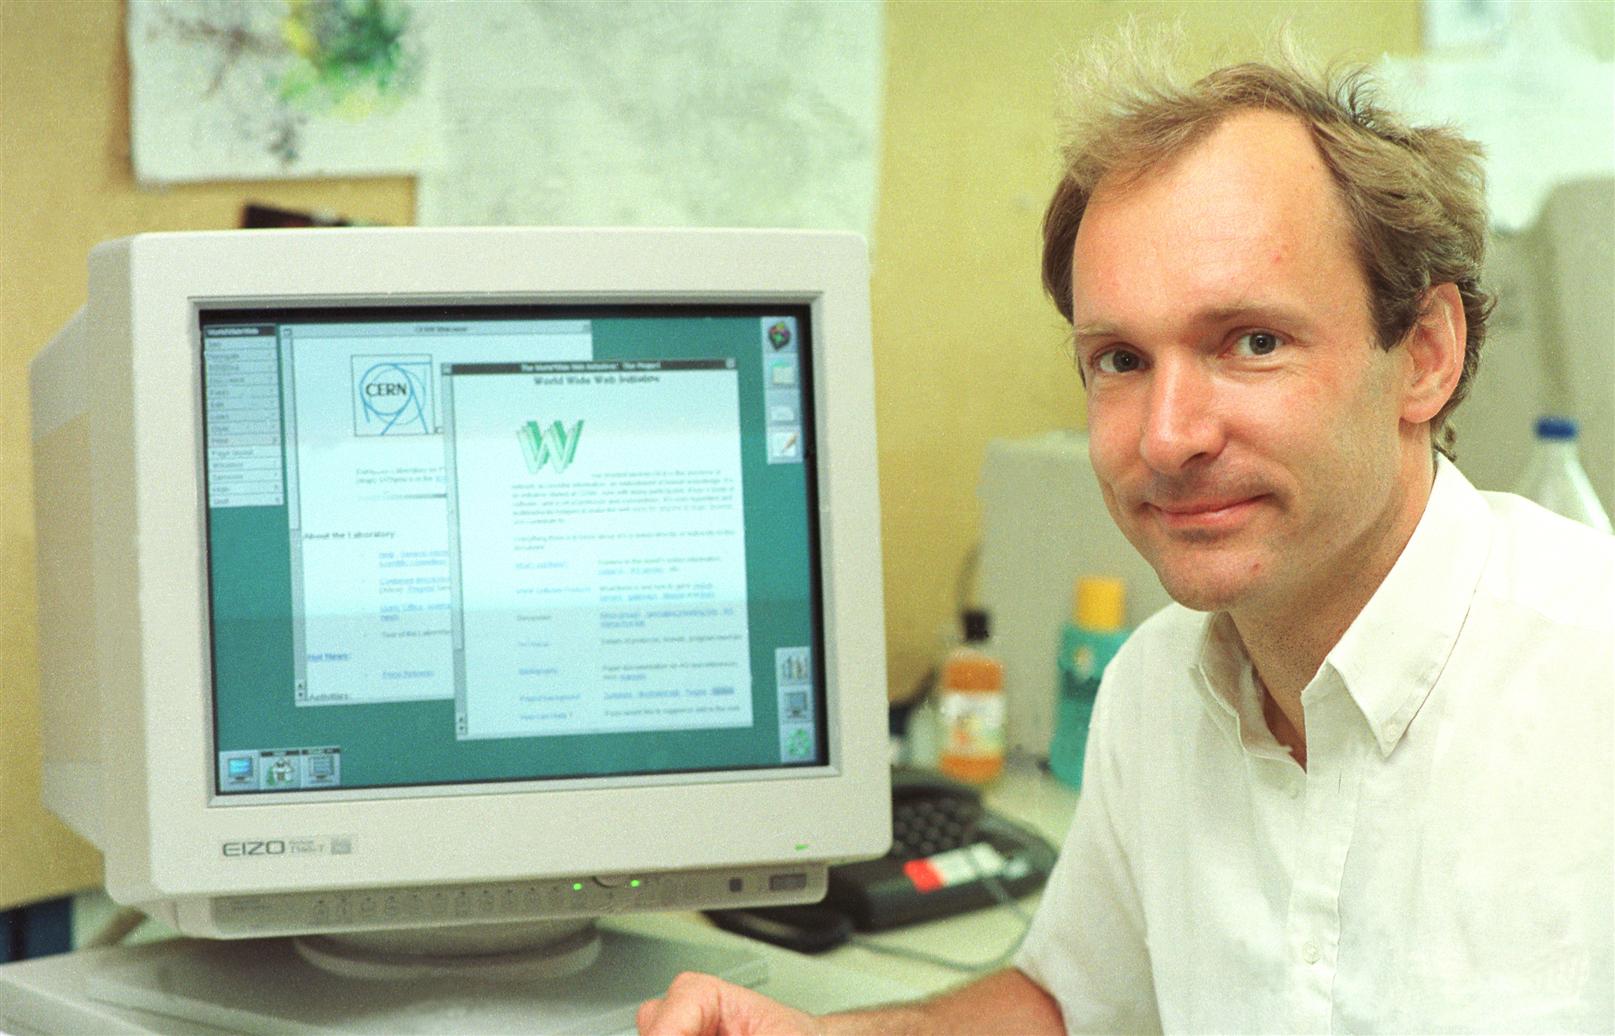 Tim Berners-Lee, the web’s inventor, in front of a computer displaying some of the first web pages in 1994.